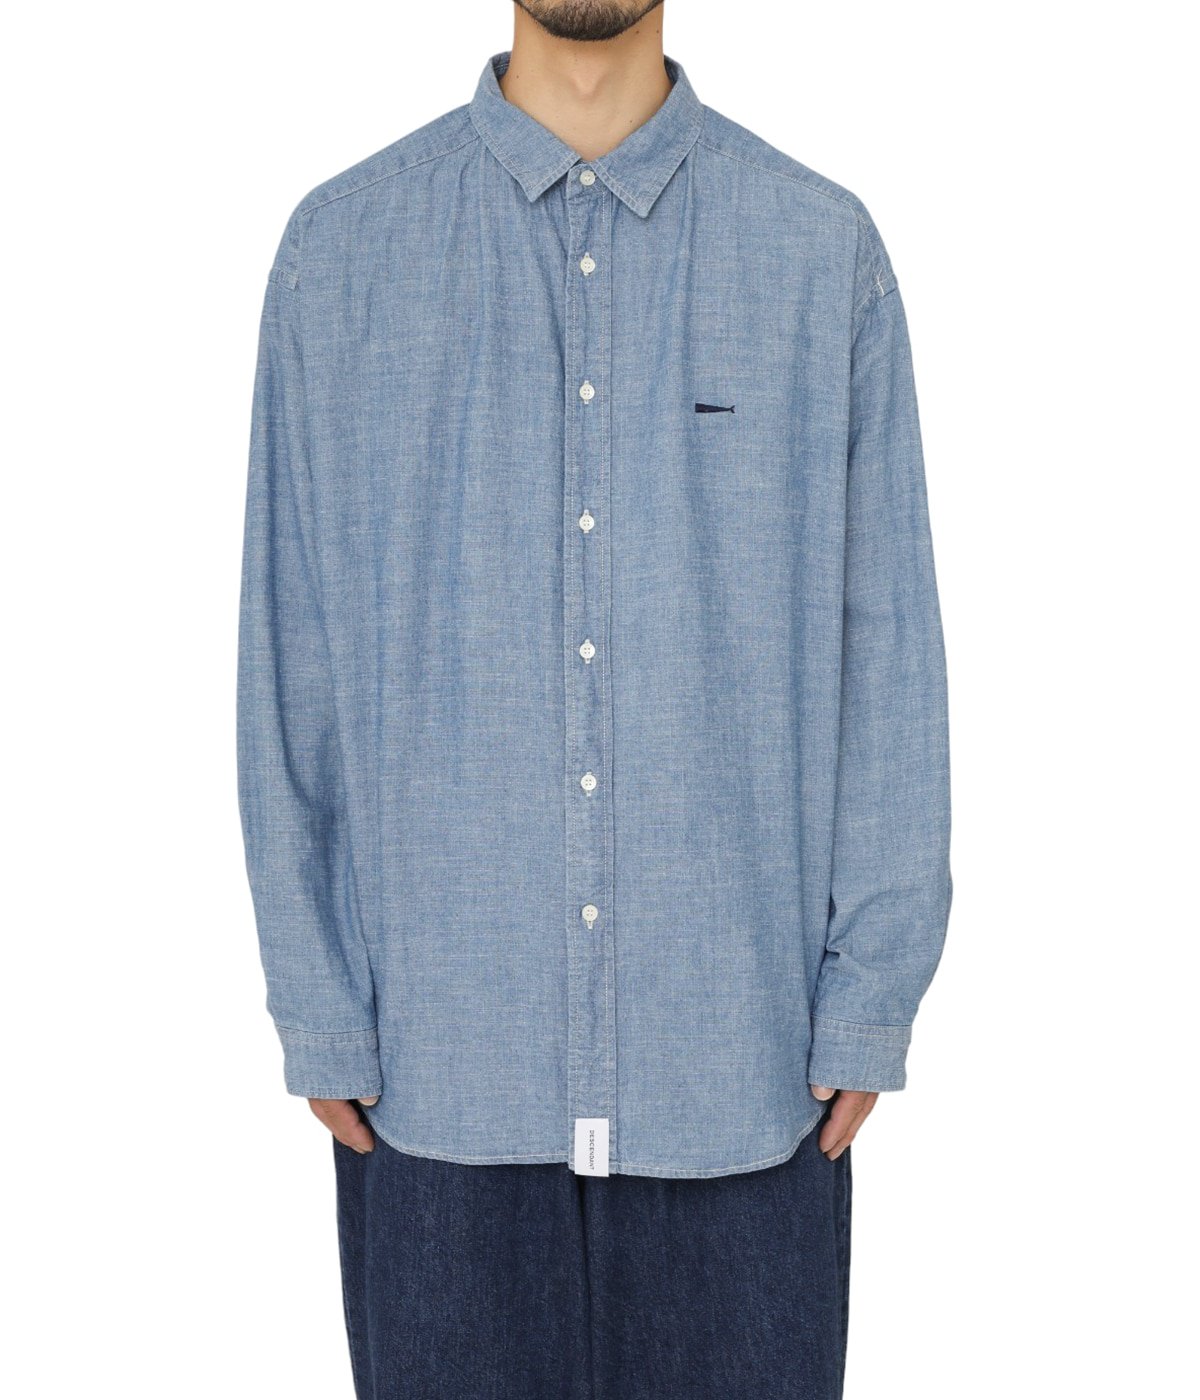 KENNEDY'S CHAMBRAY LS SHIRT | DESCENDANT(ディセンダント